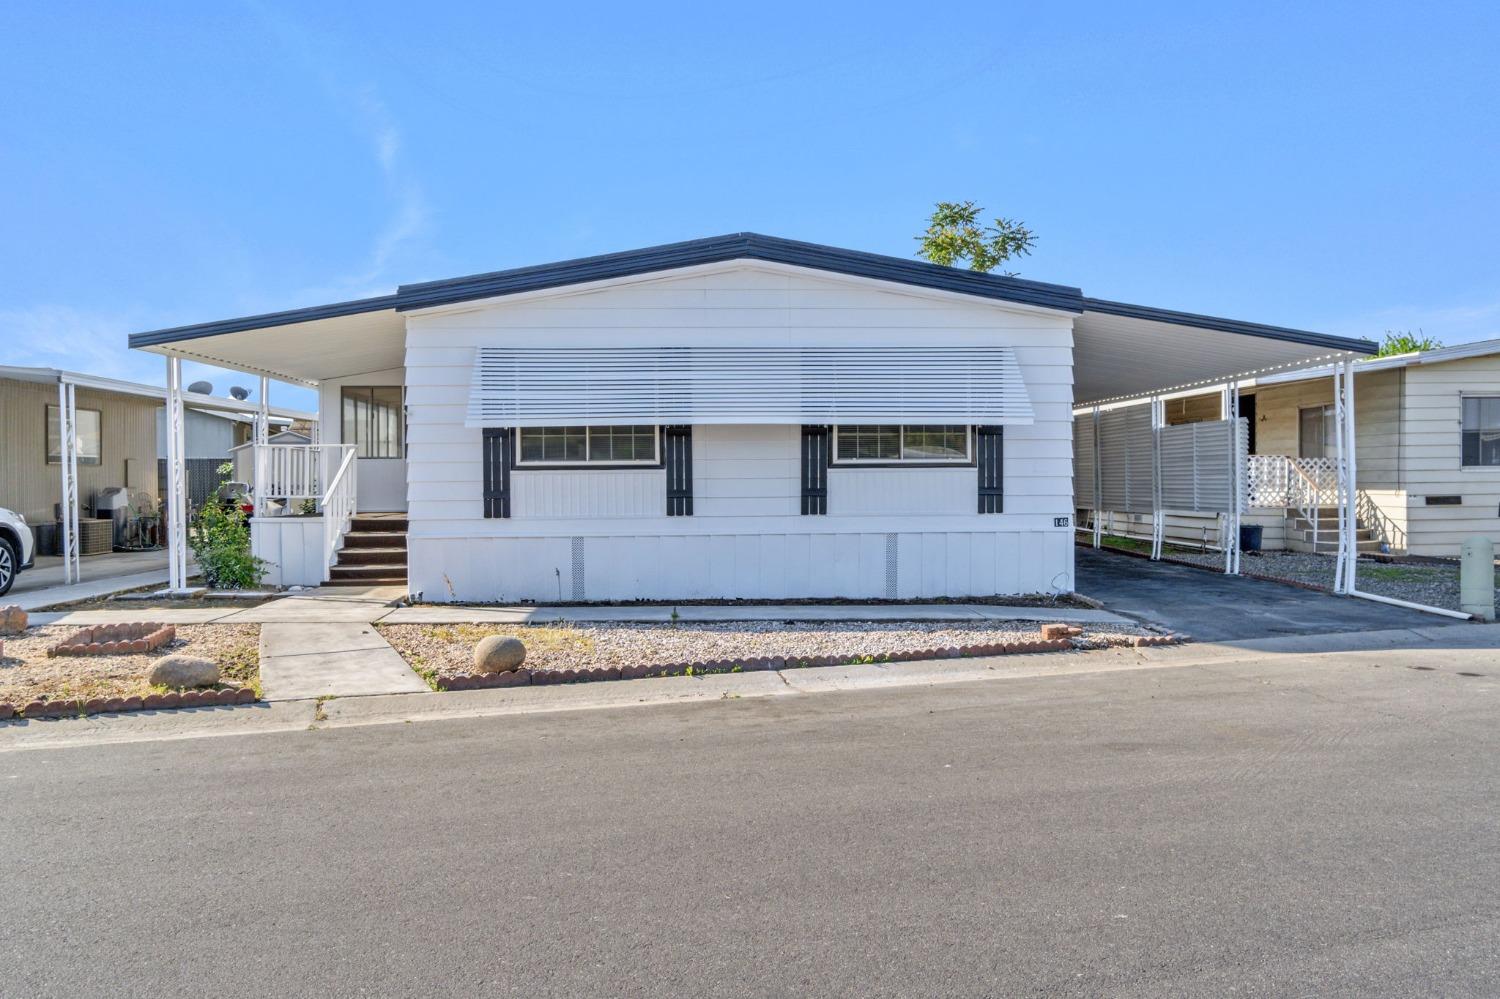 Photo of 1218 E Cleveland Ave #146 in Madera, CA